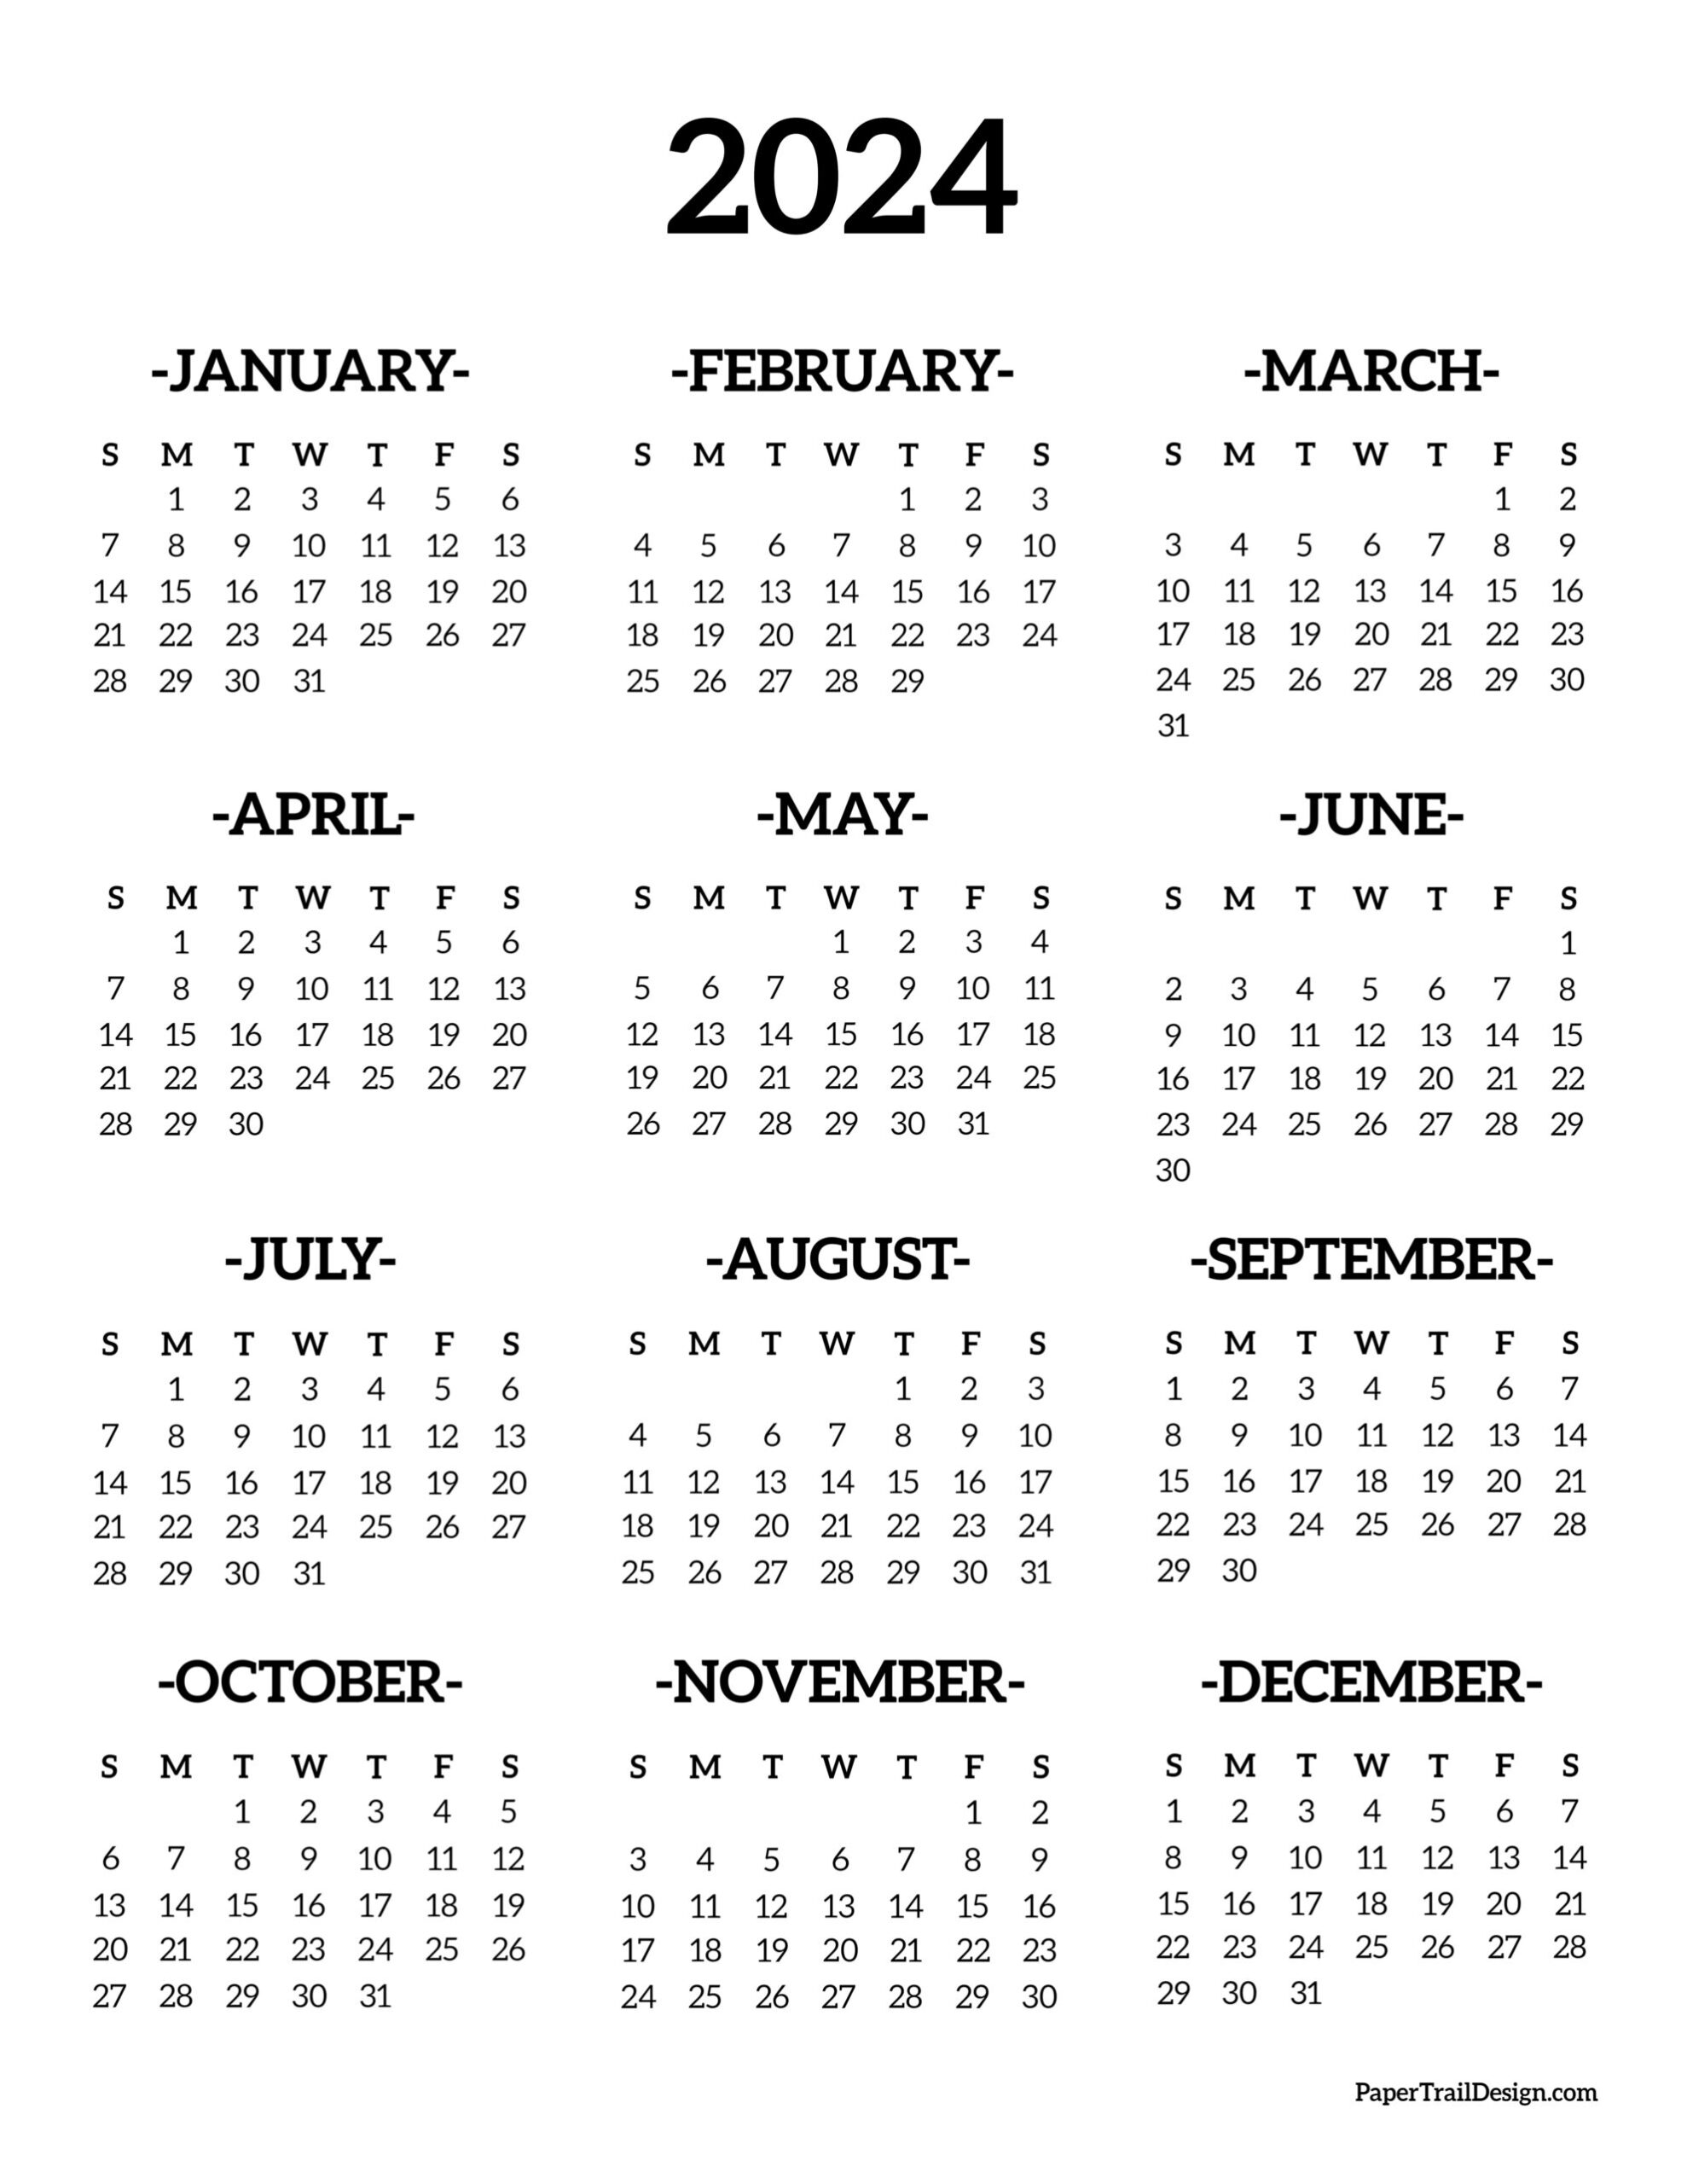 Calendar 2024 Printable One Page - Paper Trail Design for Printable 2024 Year At A Glance Calendar